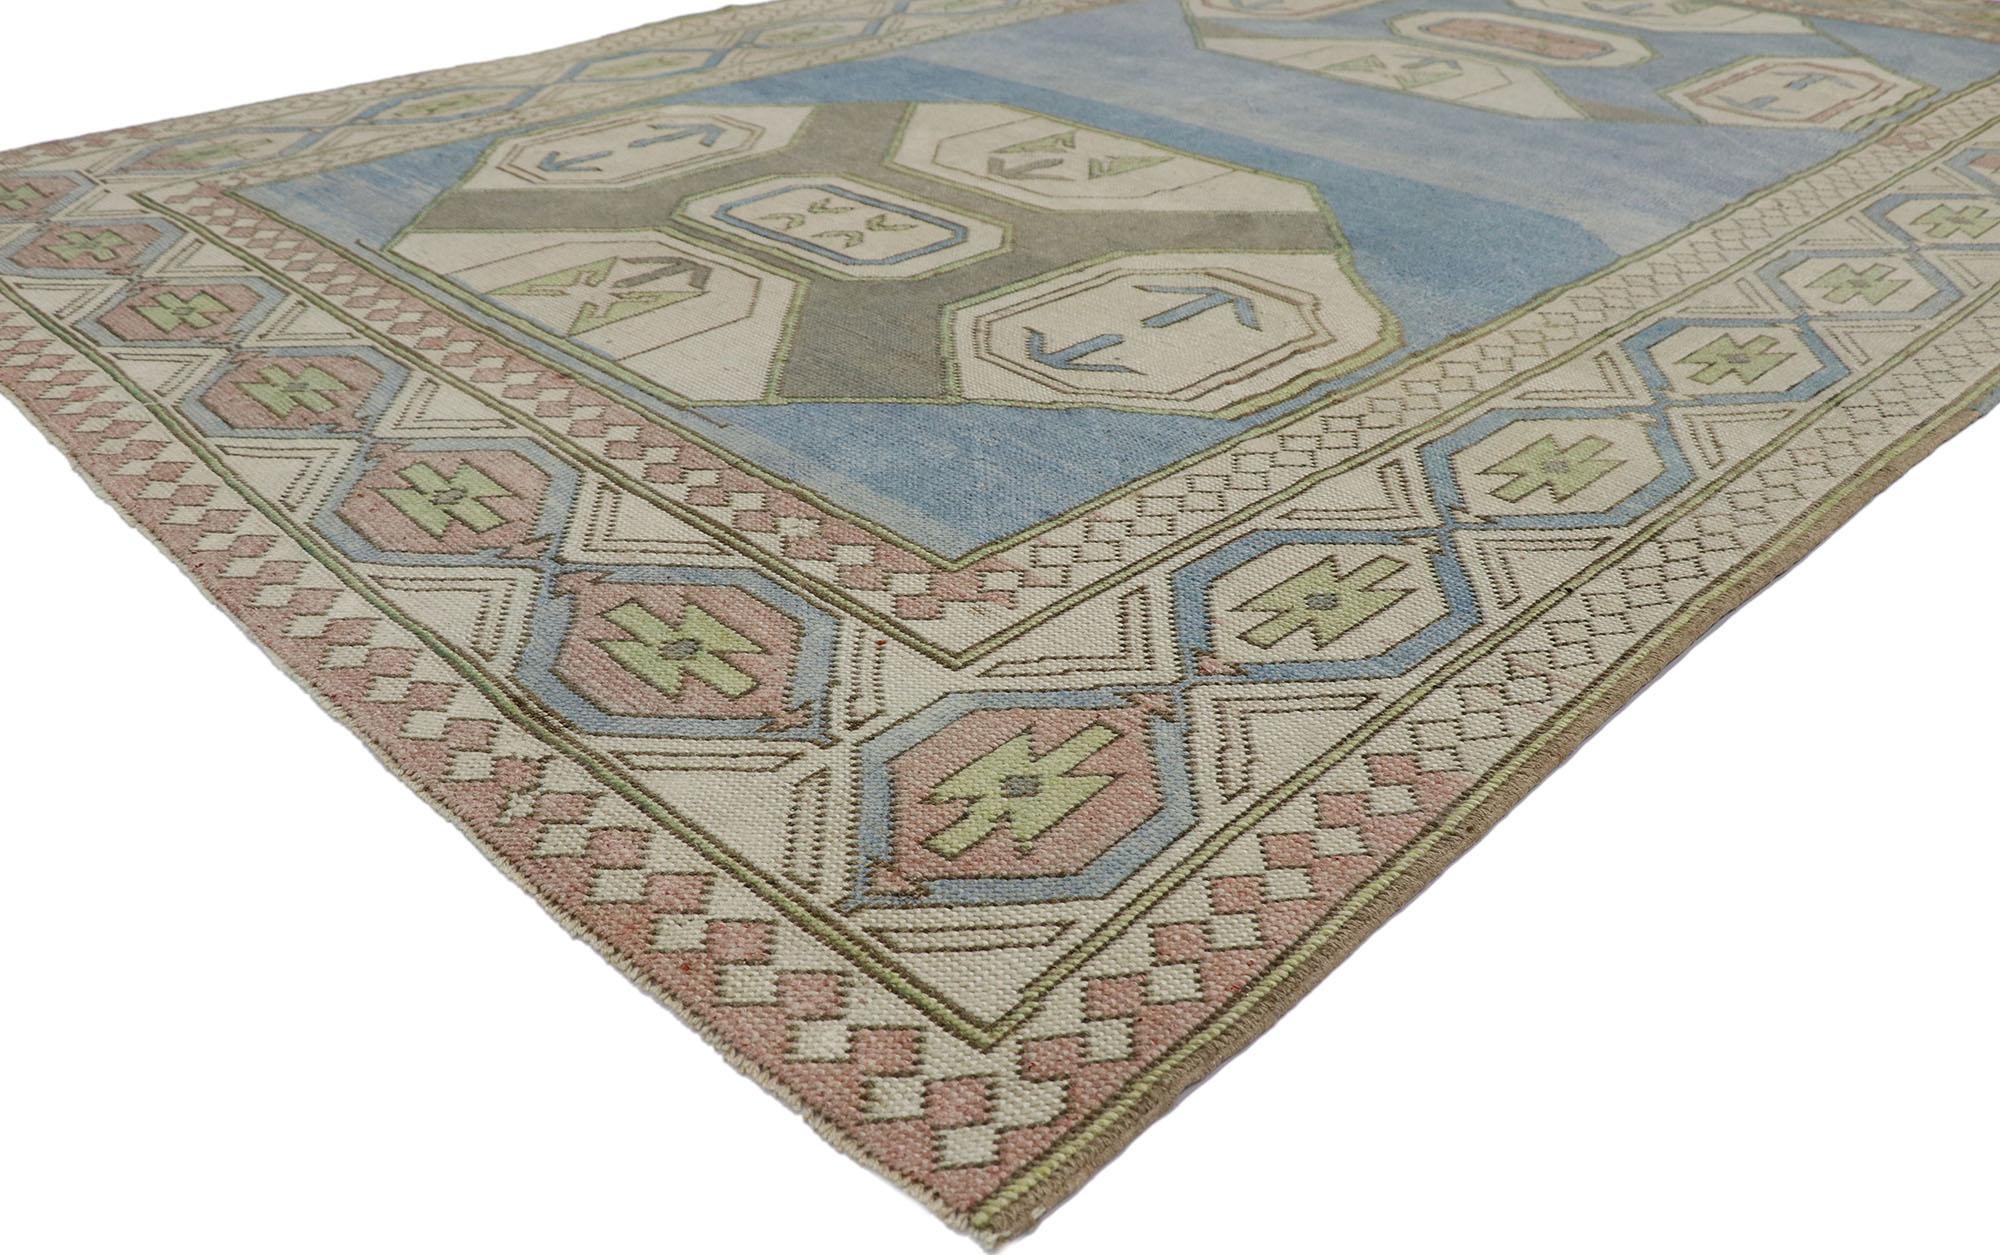 53569 Vintage Turkish Oushak rug with Tribal Style 06'09 x 10'03. With its geometric design and soft colors, this hand-knotted wool vintage Turkish Oushak rug is a captivating vision of woven beauty. The abrashed sky blue field features two